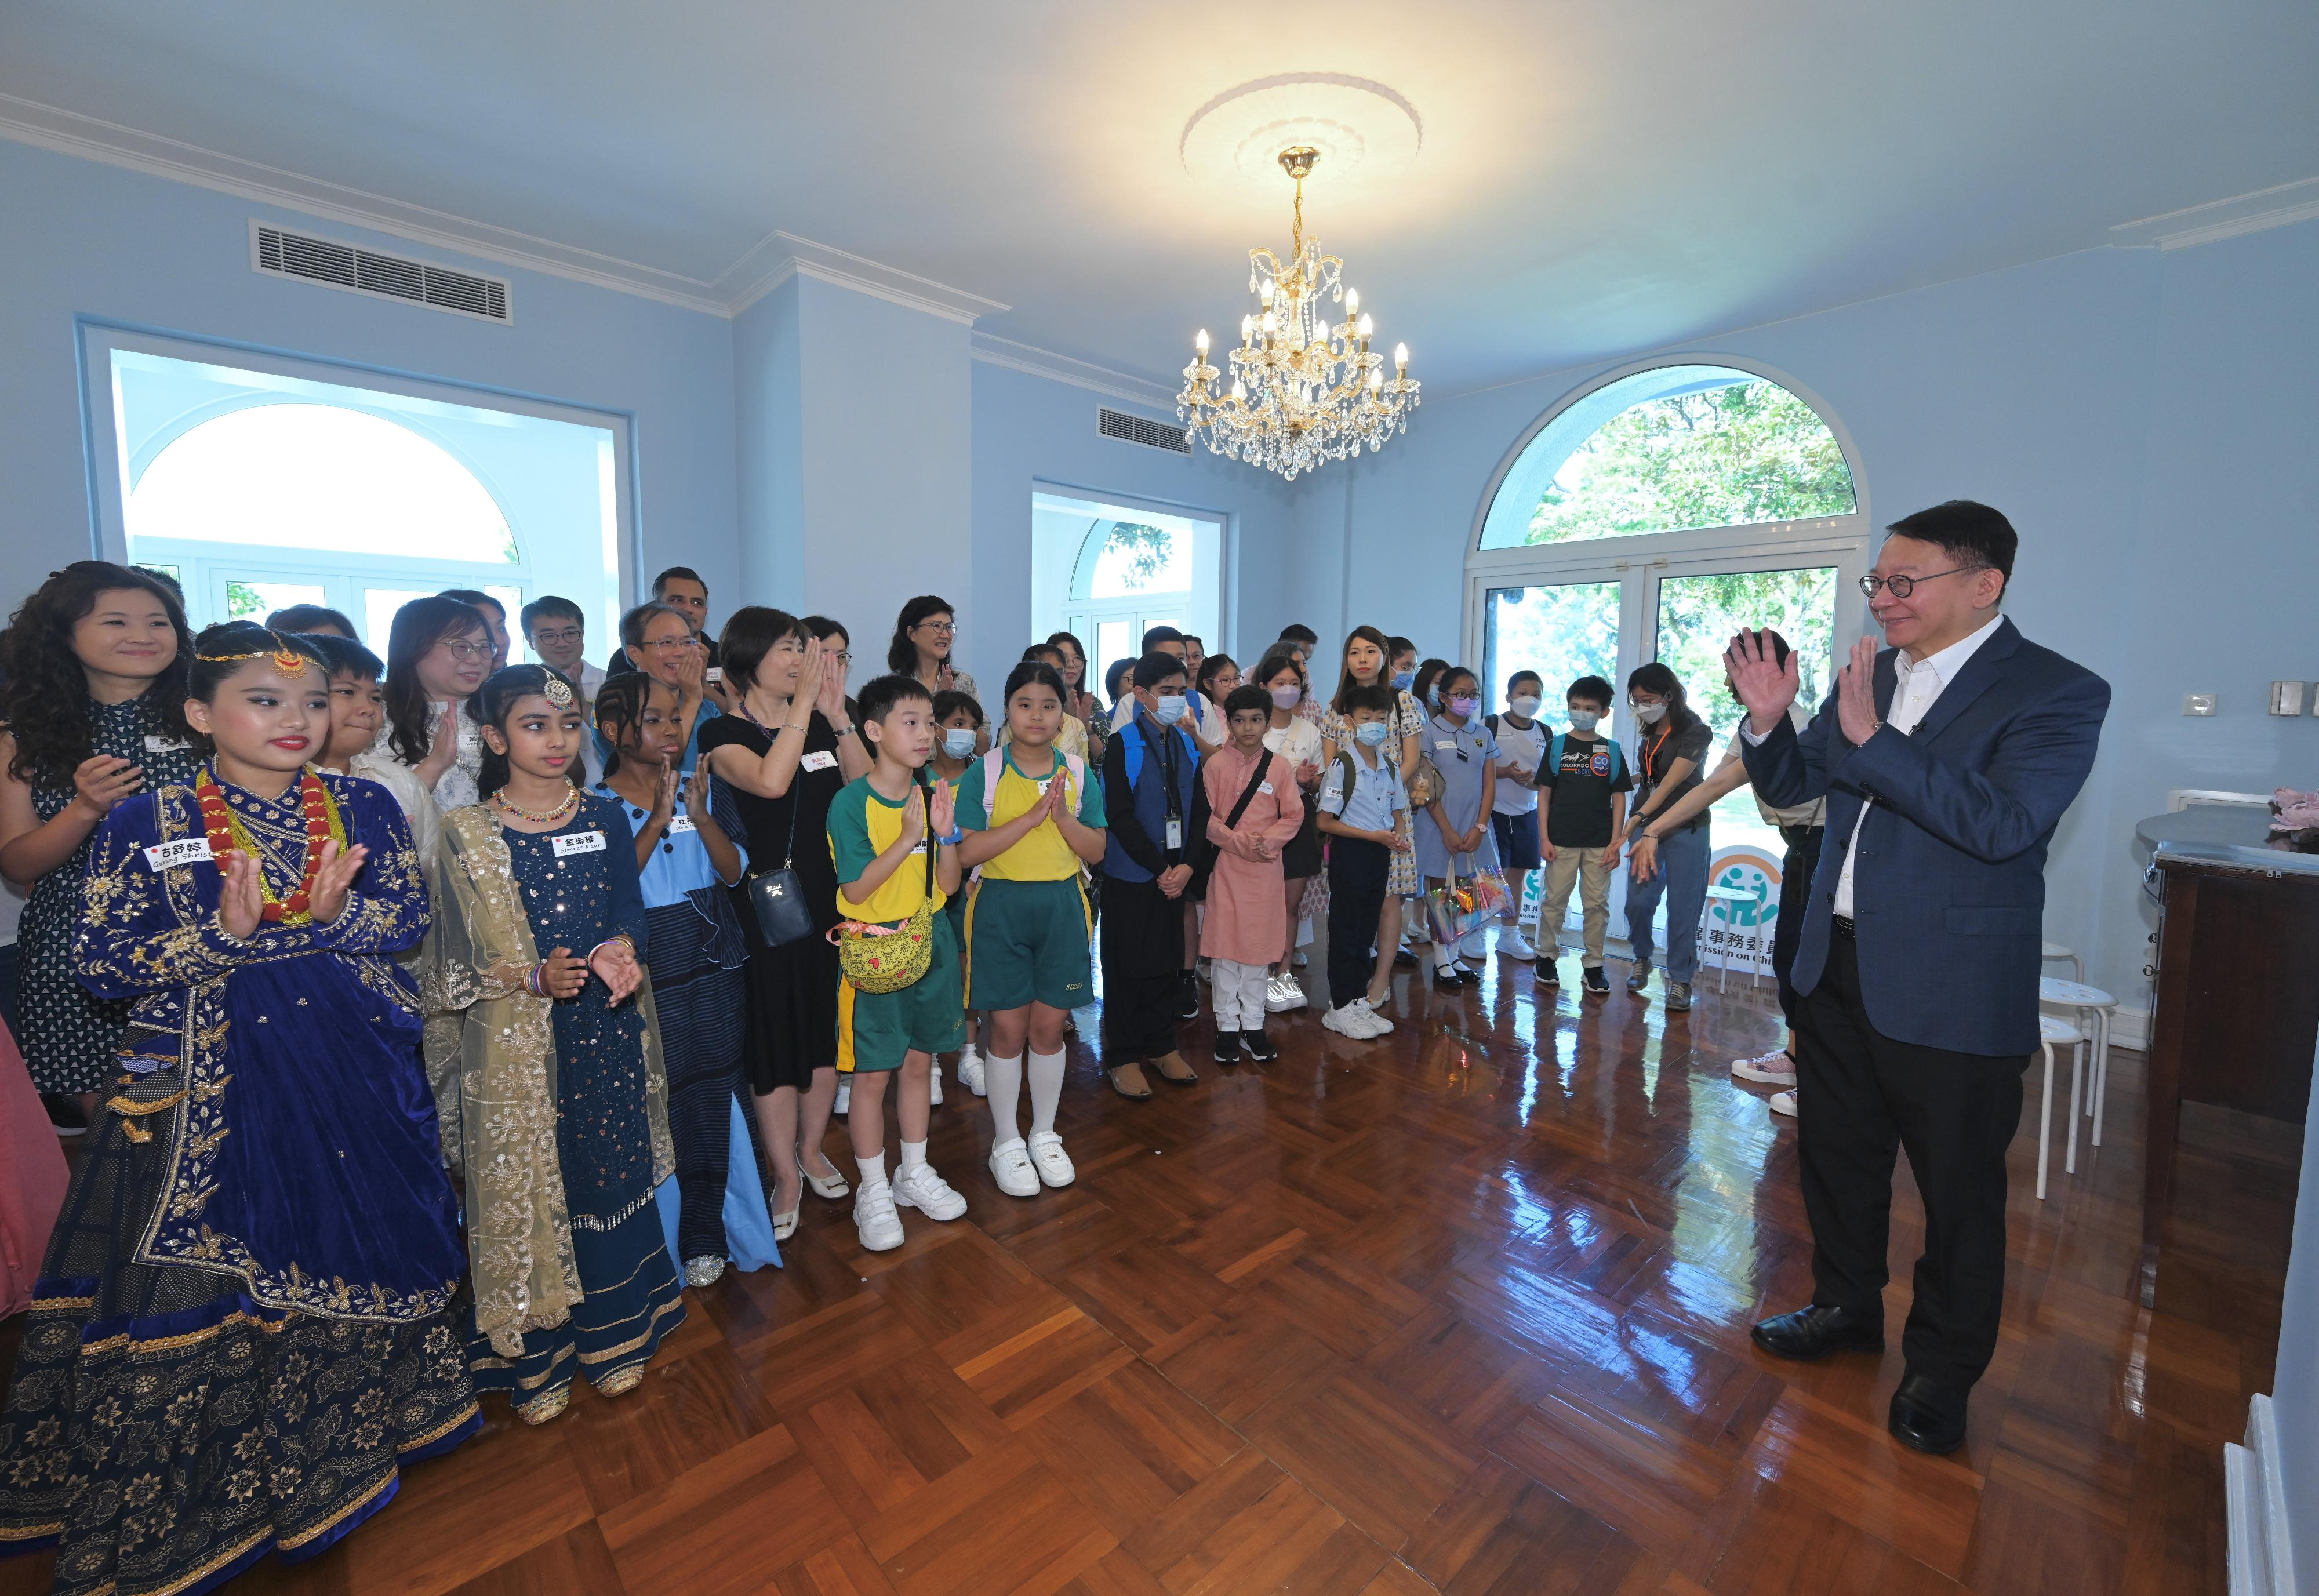 The Chief Secretary for Administration and Chairperson of the Commission on Children (CoC), Mr Chan Kwok-ki, hosted about 40 primary school students at Victoria House today (September 23) at the "Walk with Kids" stakeholder engagement event of the CoC on the theme of harmony and cultural inclusion. They interacted with one another and celebrated the Mid-Autumn Festival together. Photo shows Mr Chan (first right) welcoming students at his official residence.